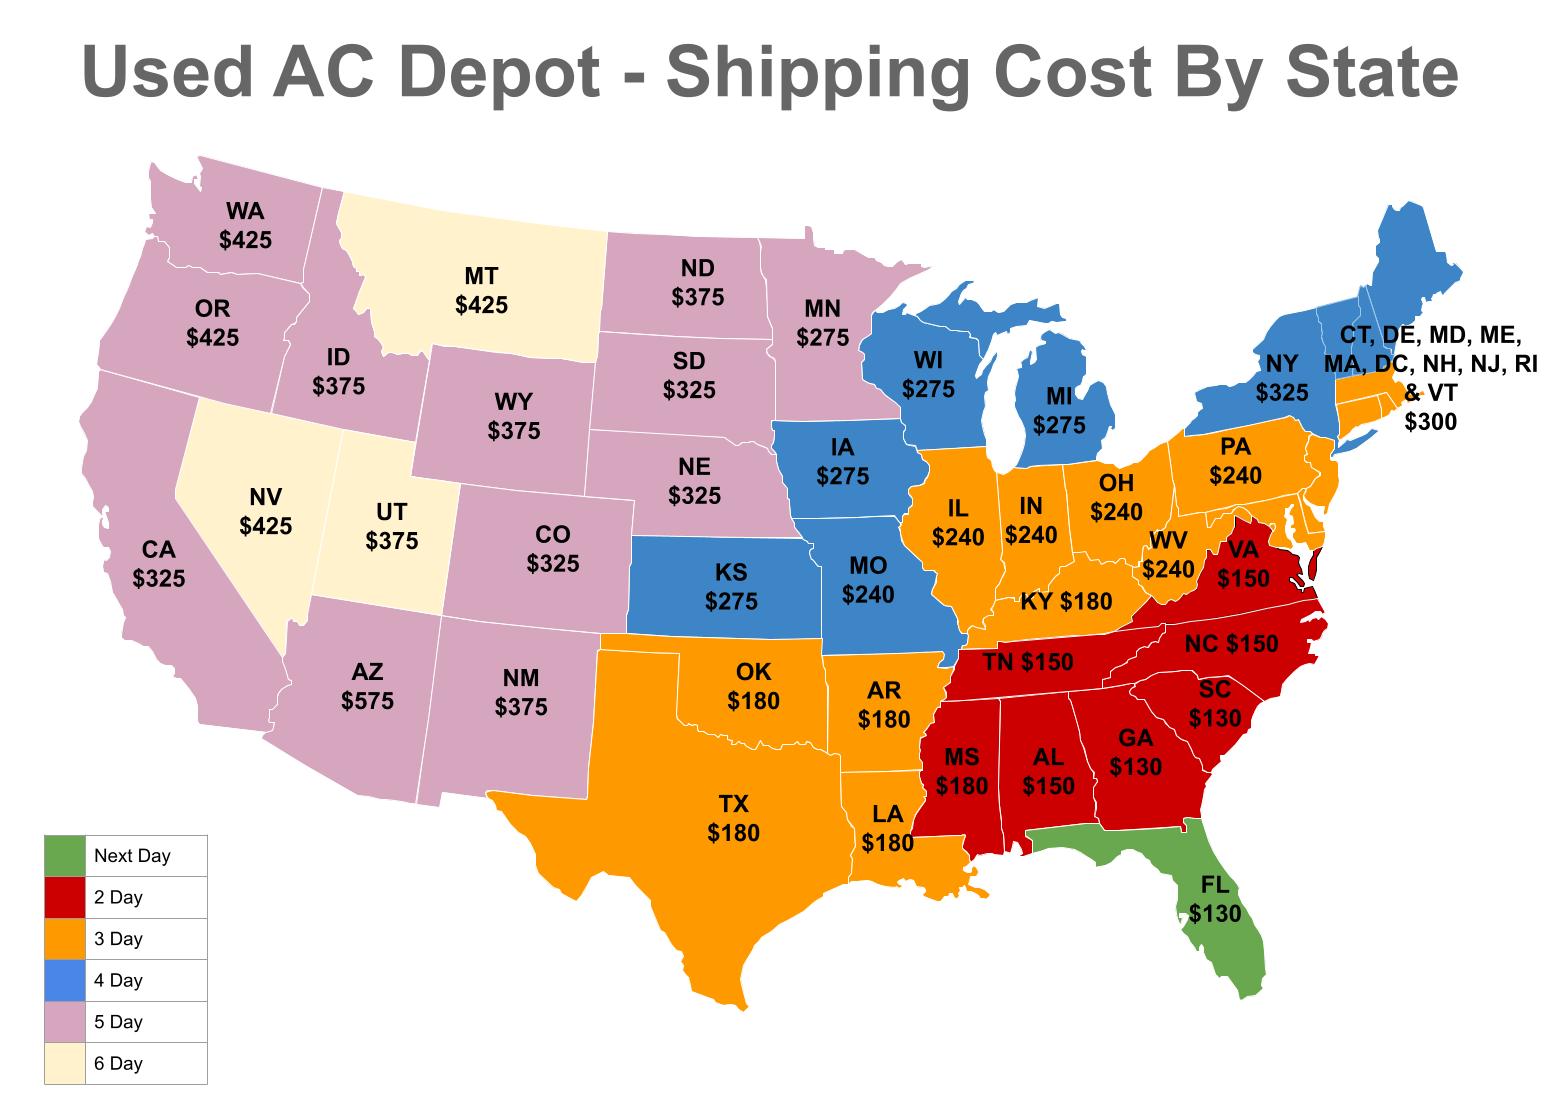 used-ac-depot-shipping-cost-by-state-3-15-22.jpg